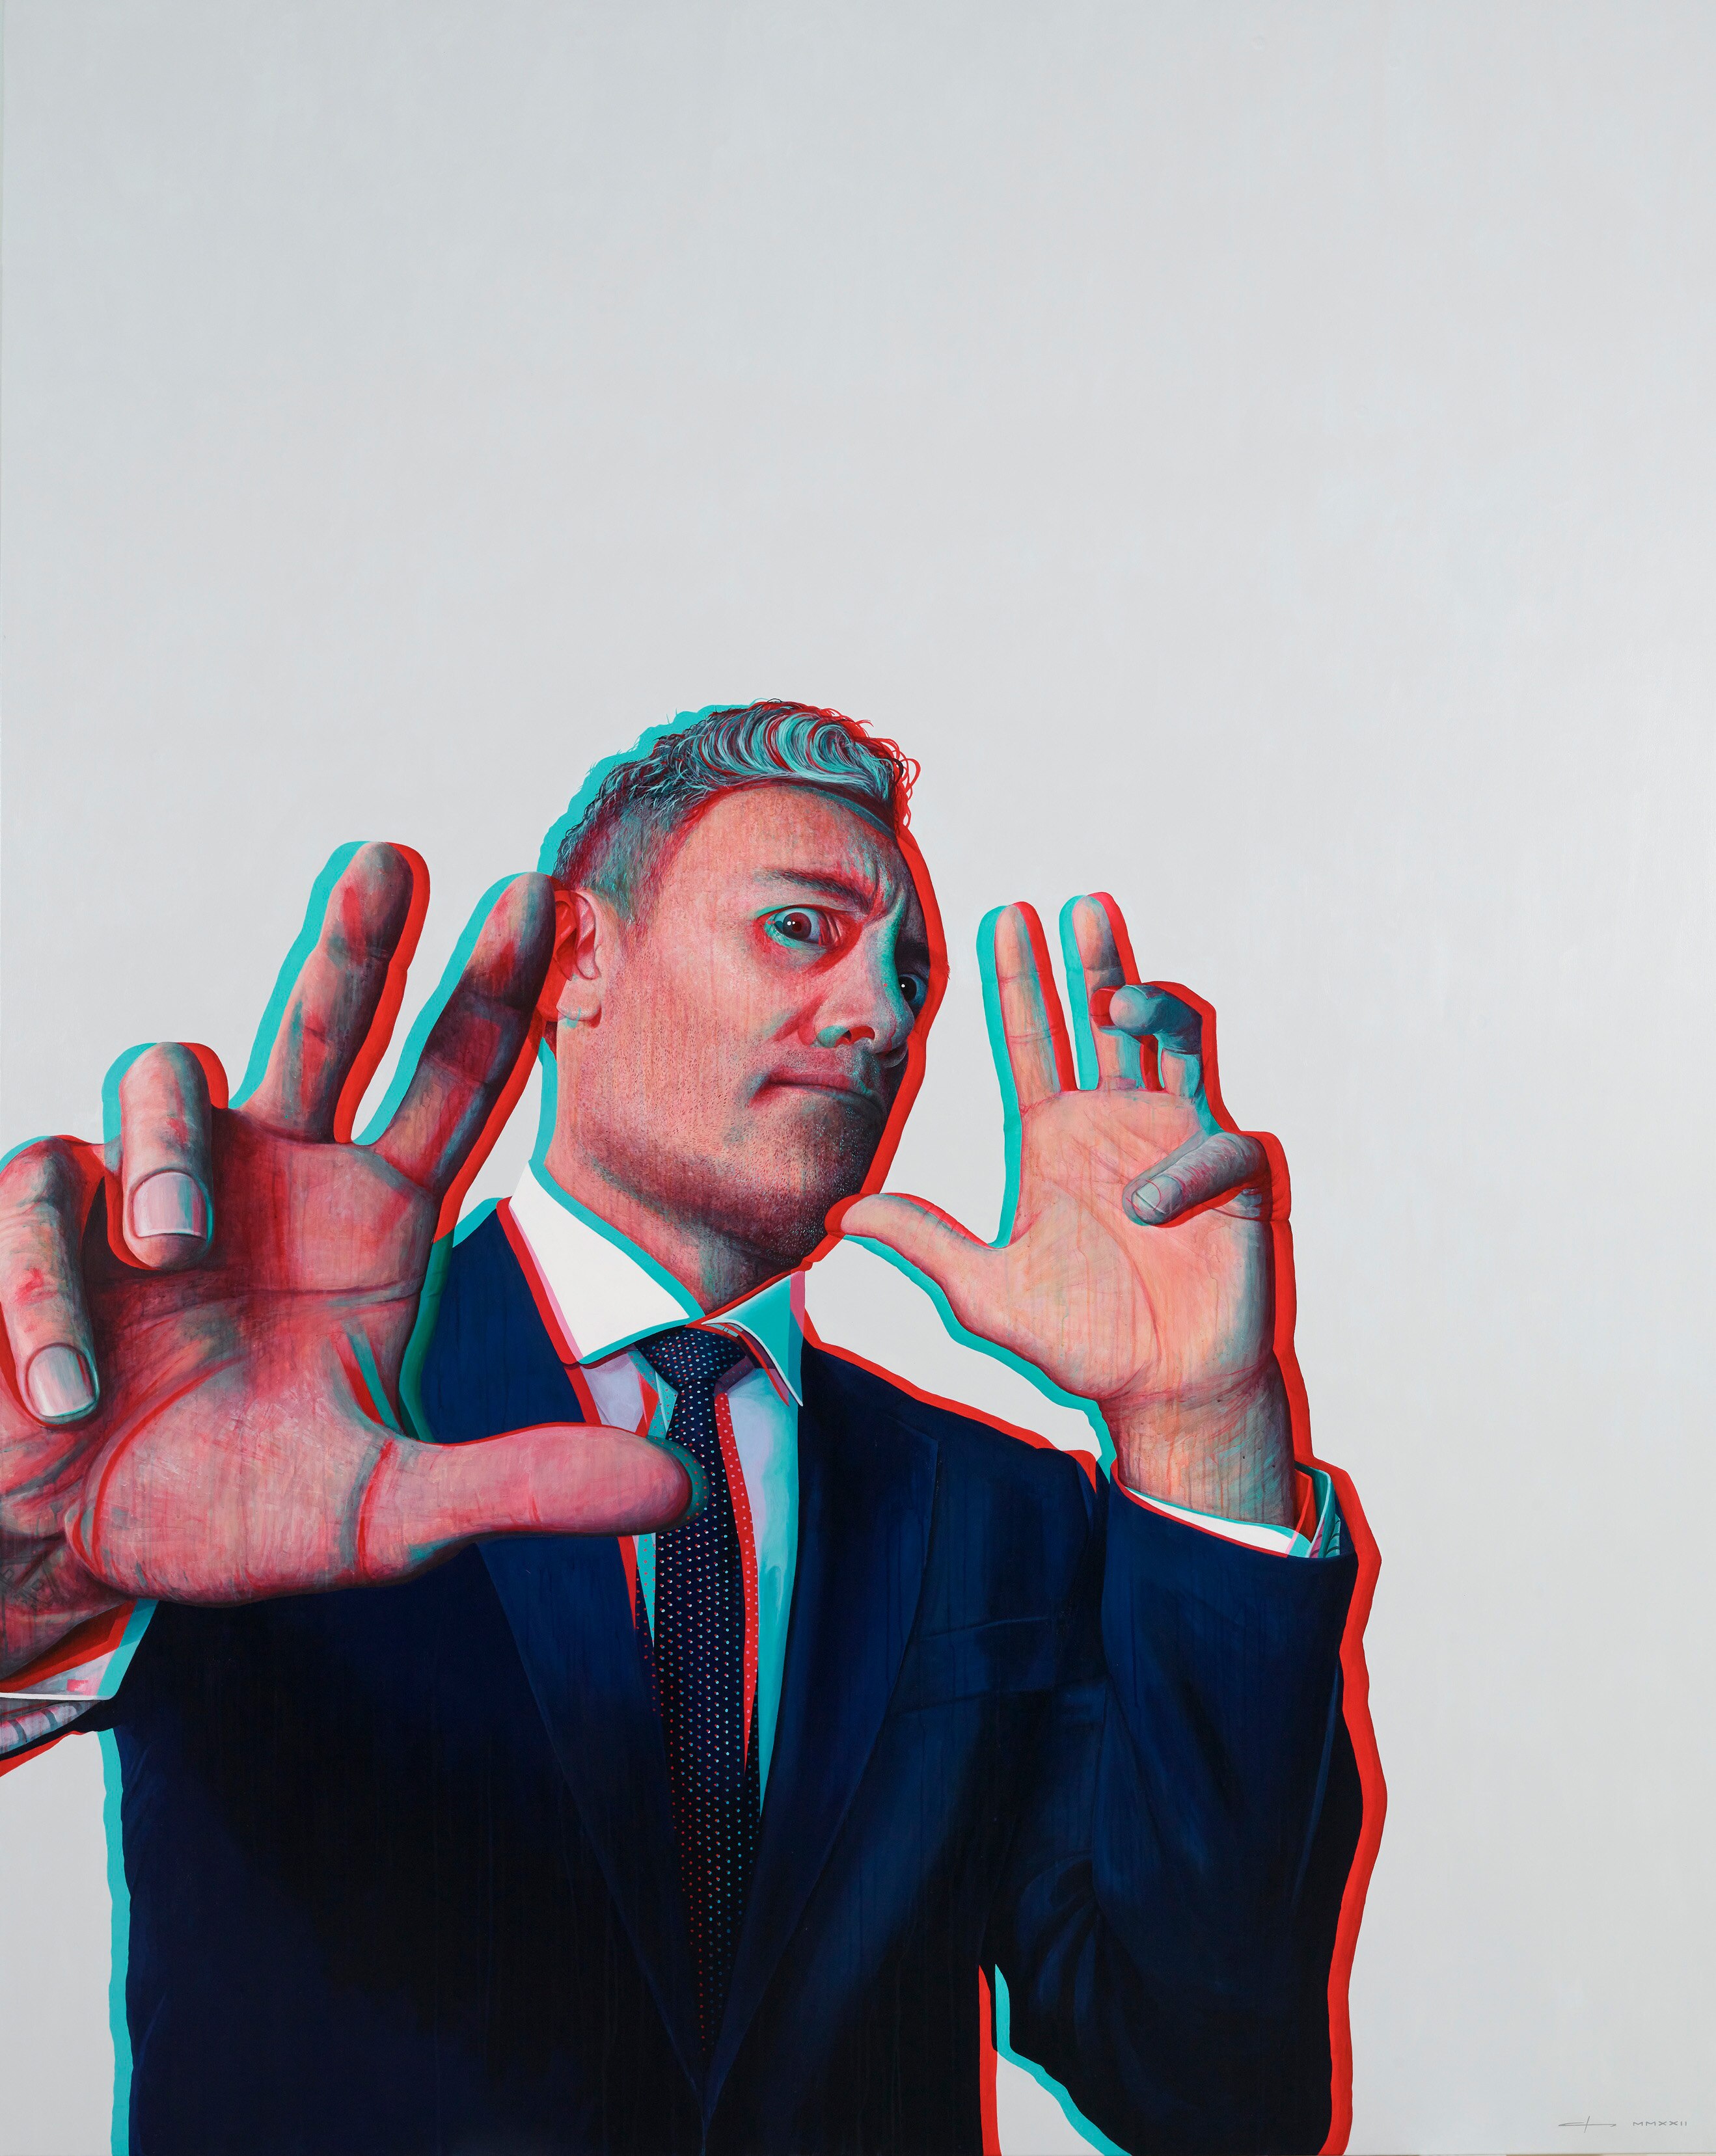 Portrait of Taika Waititi, a grey-haired man in a navy suit with hands held up to his face portrayed in a 3D glasses art style.